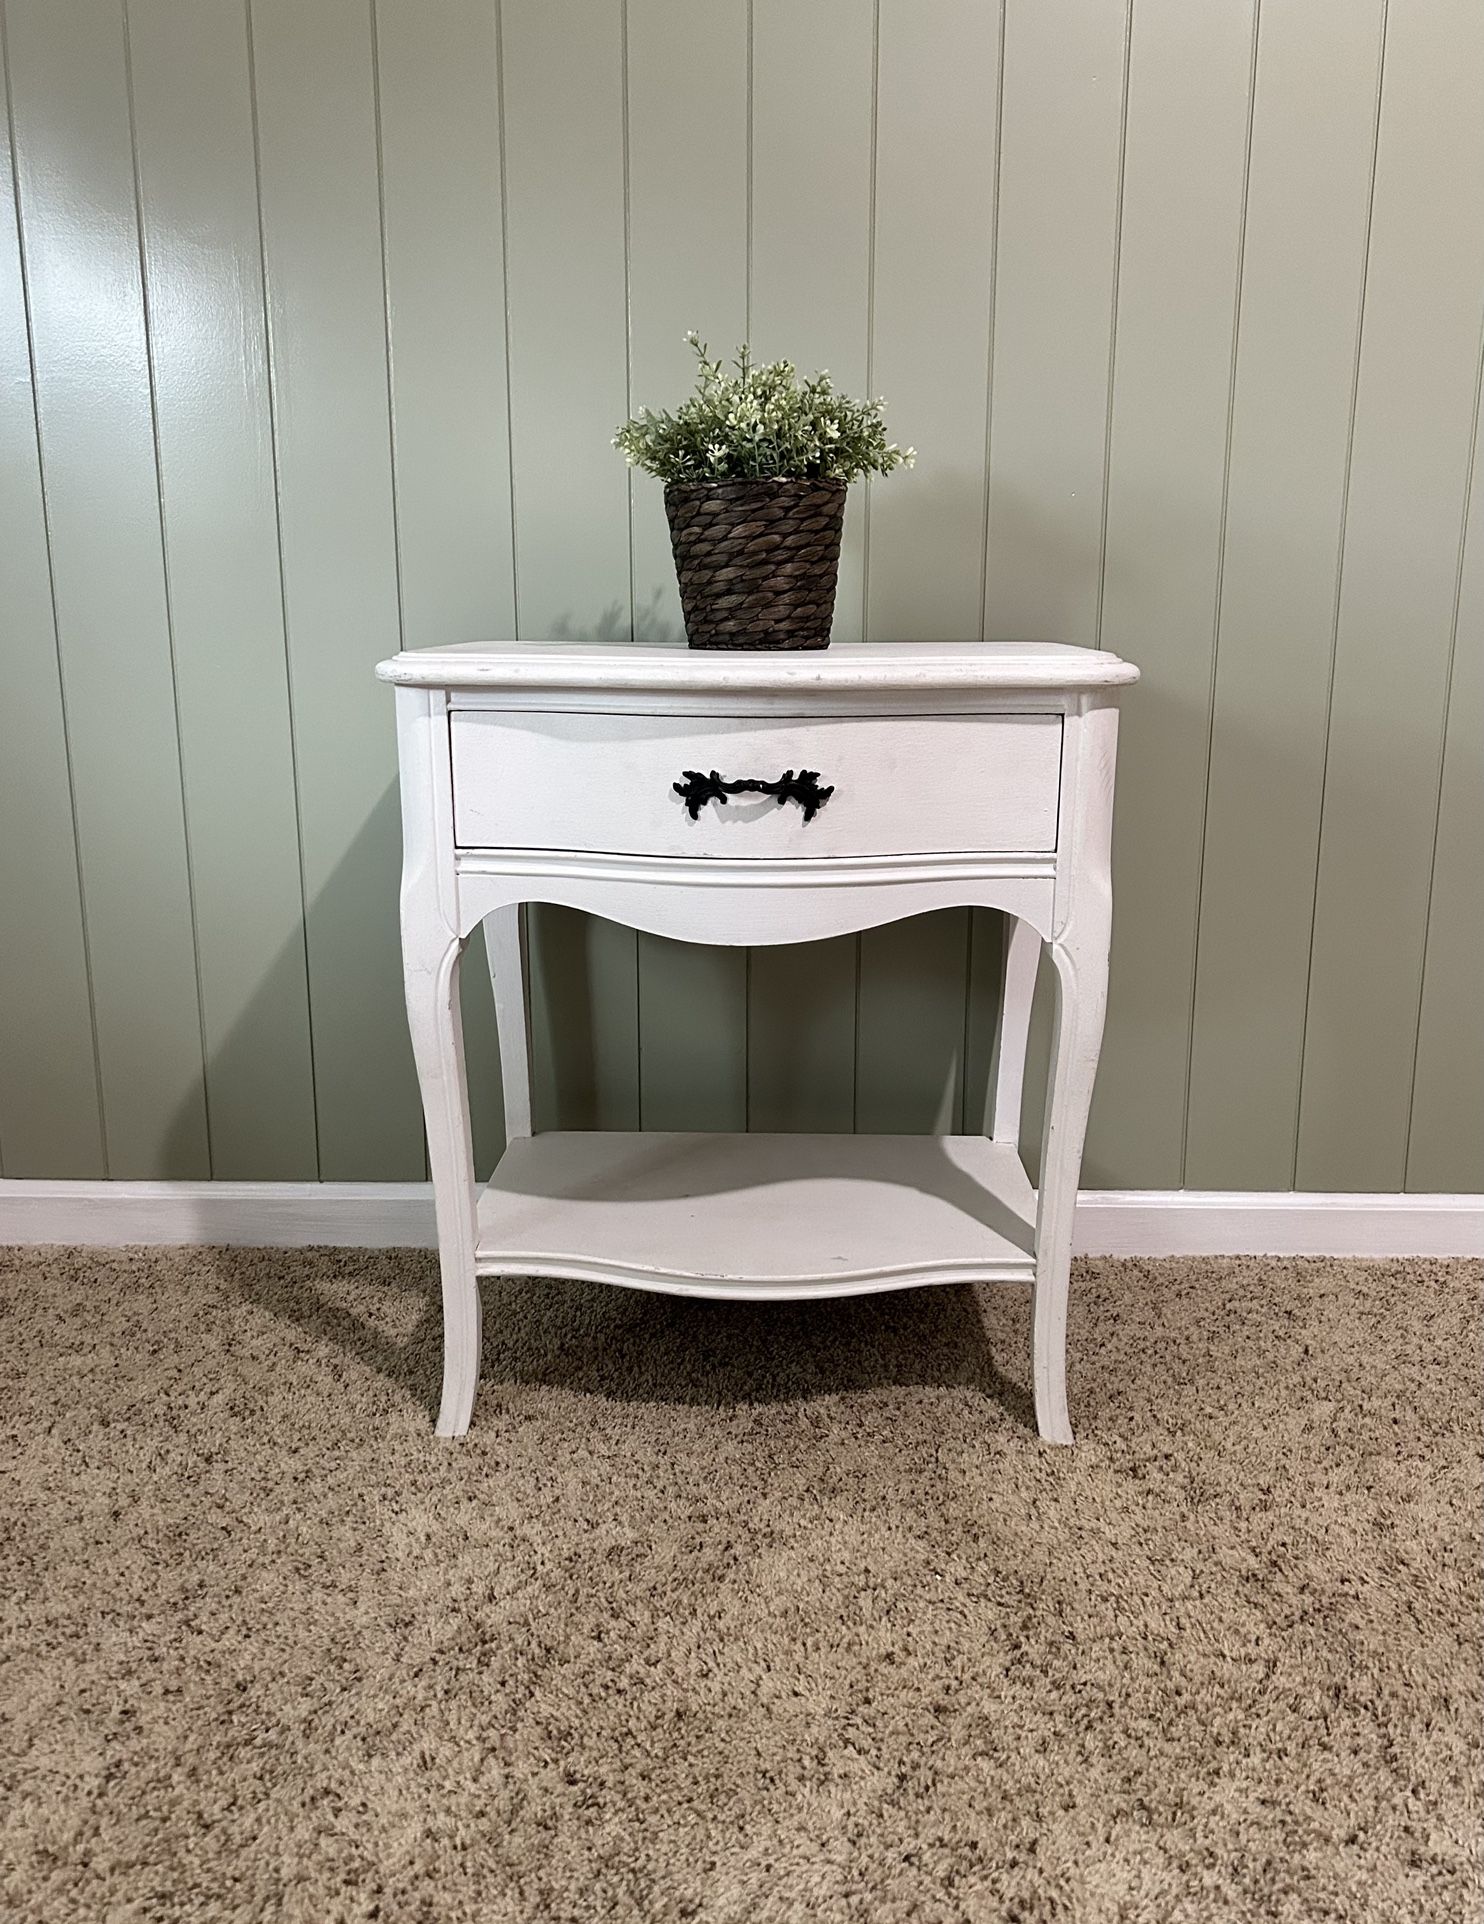 Rustic Shabby Chic Farmhouse End Table Nightstand Furniture Dixie